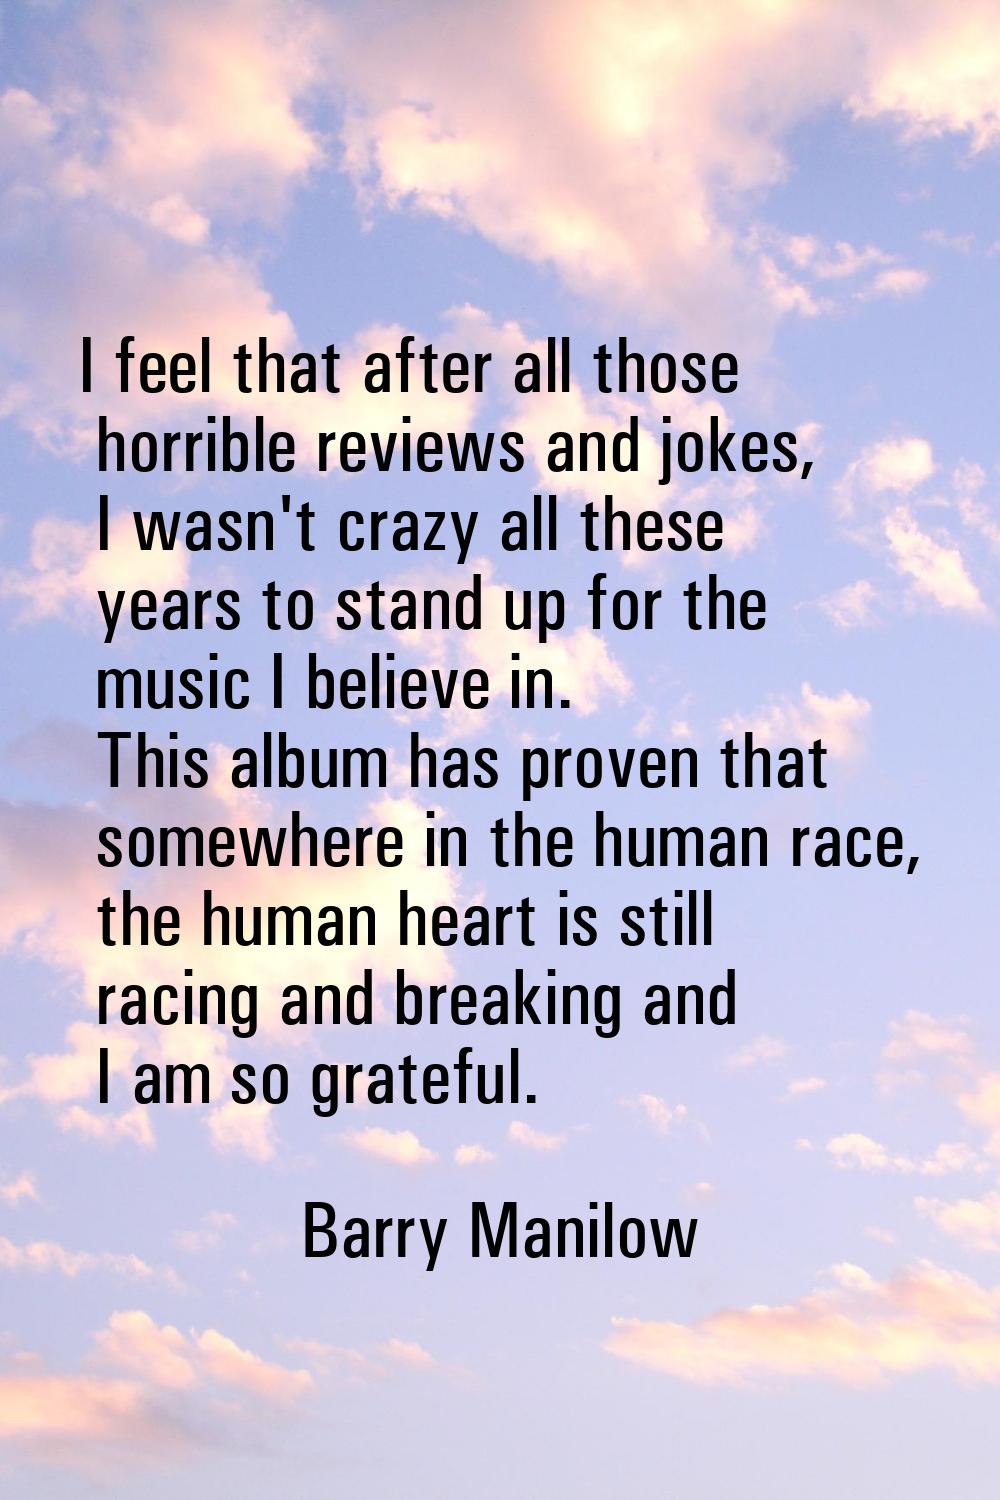 I feel that after all those horrible reviews and jokes, I wasn't crazy all these years to stand up 